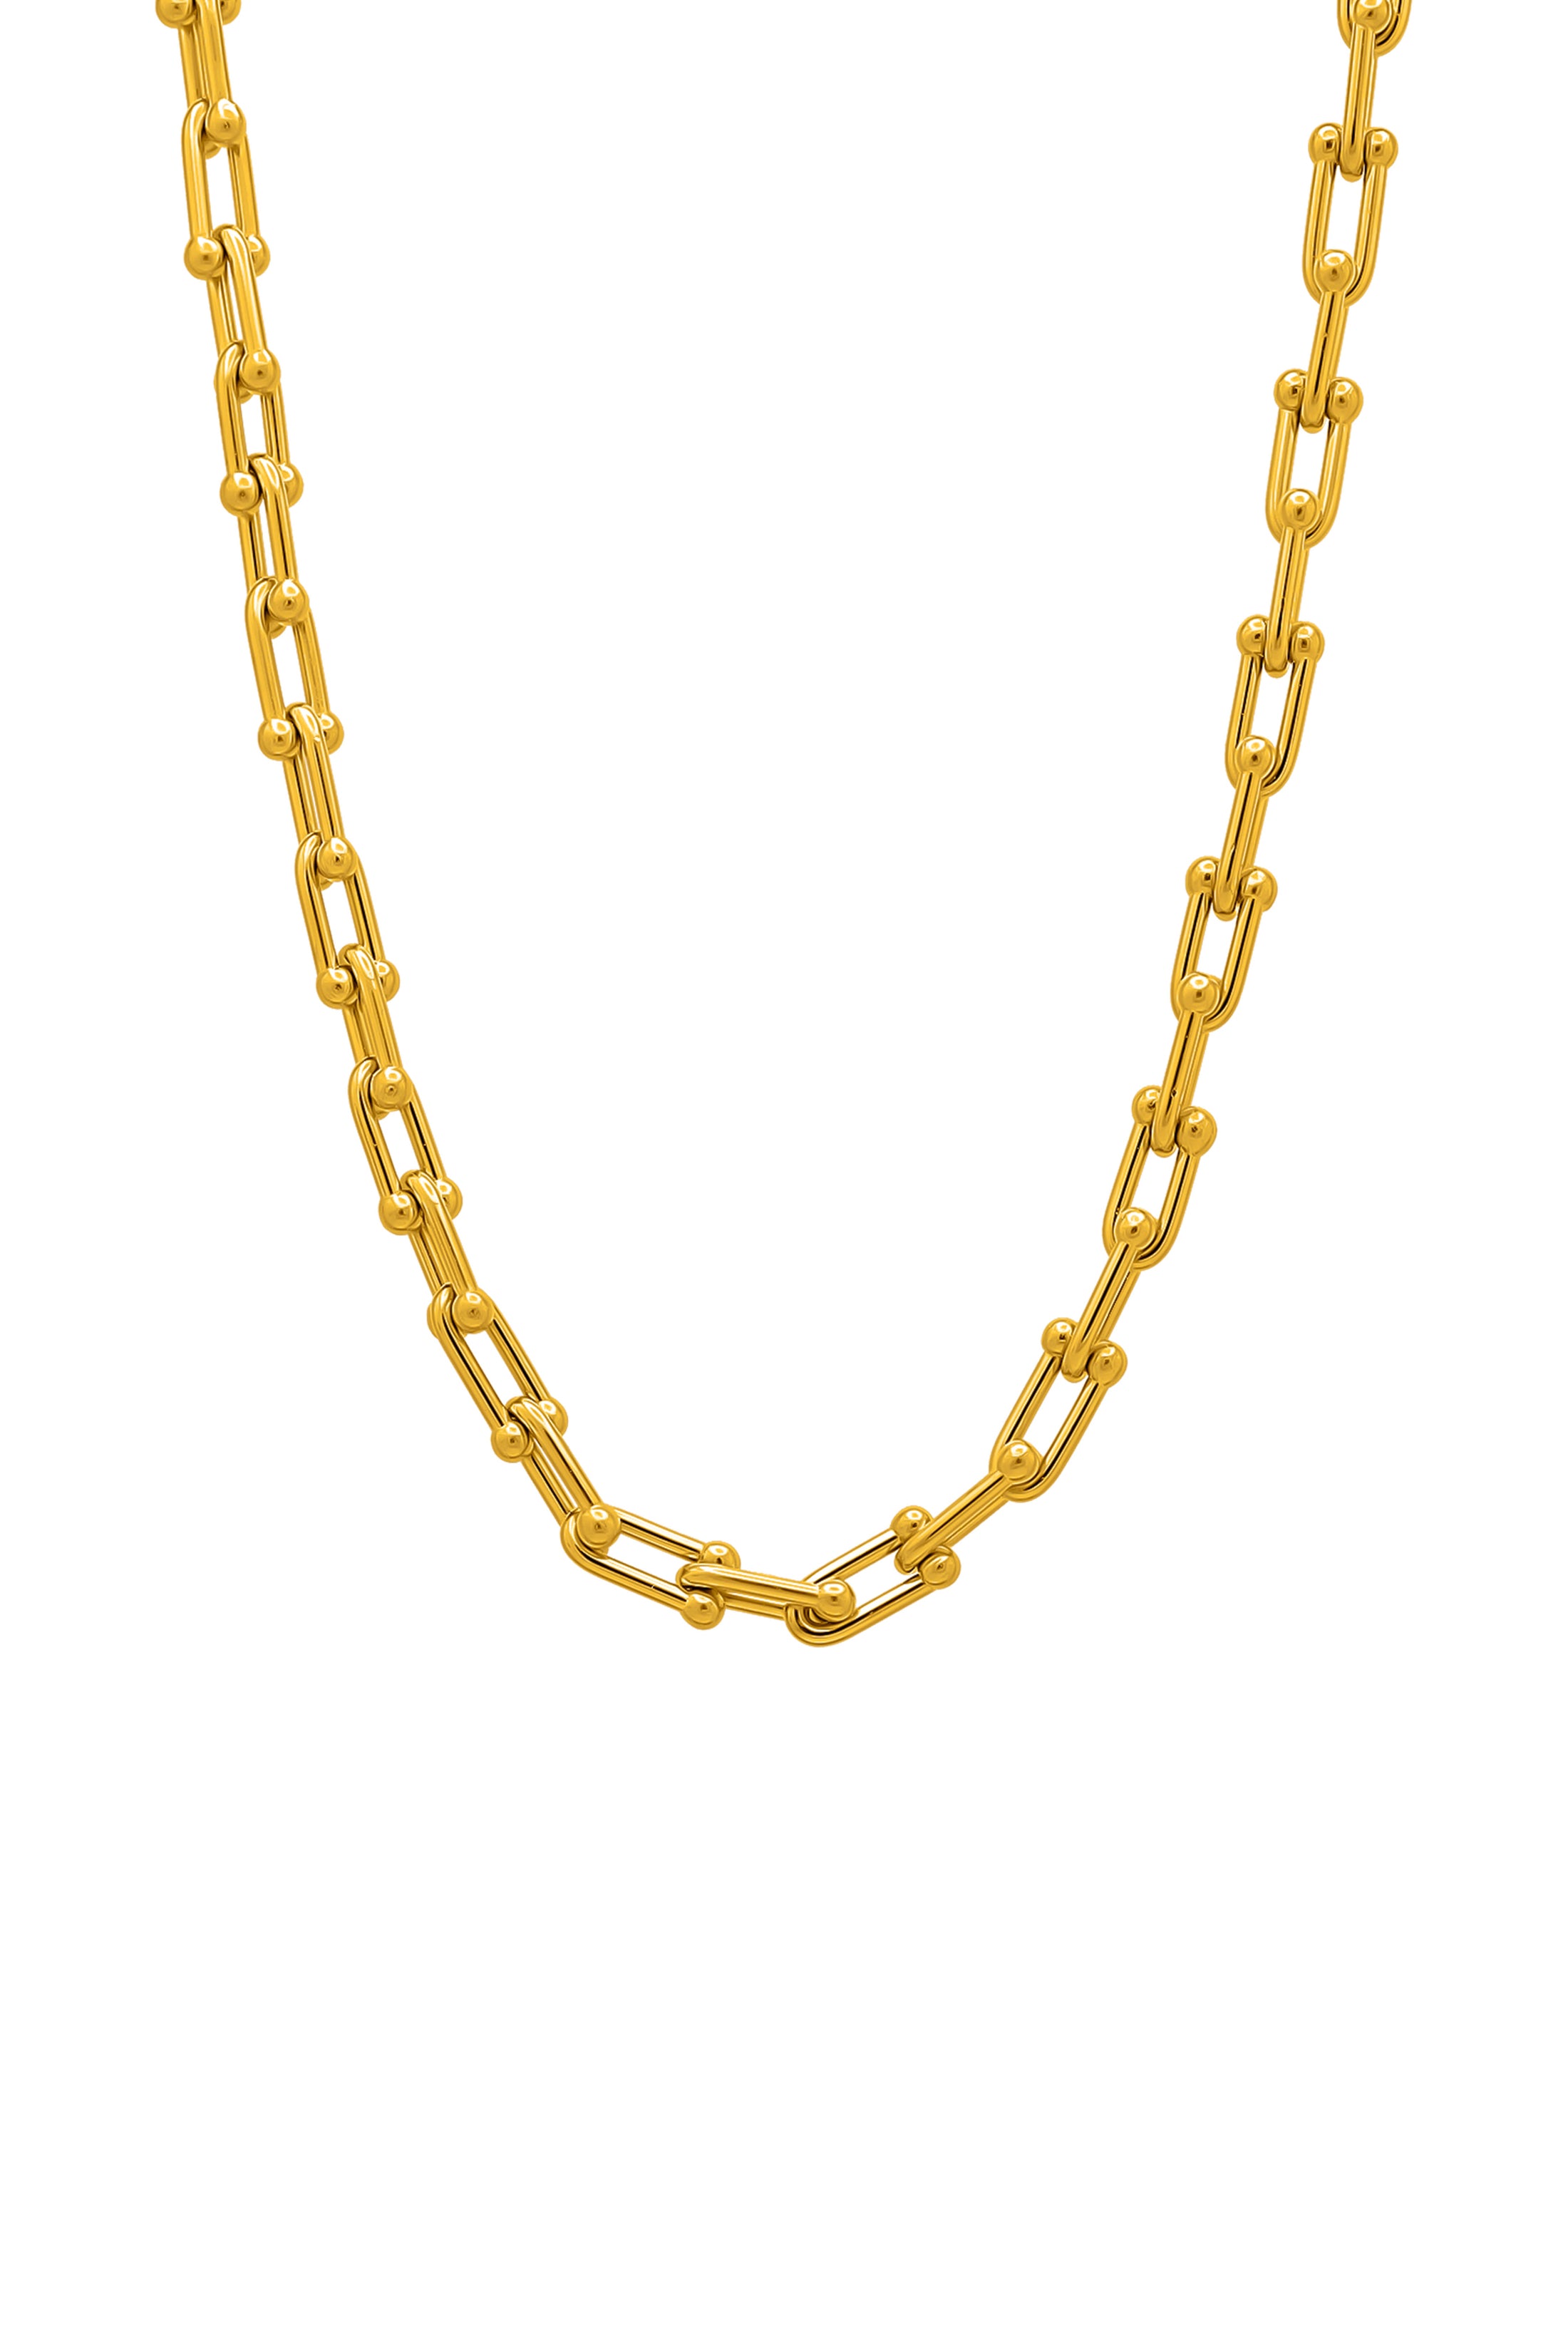 Maria’s Statement Link Chain Necklace